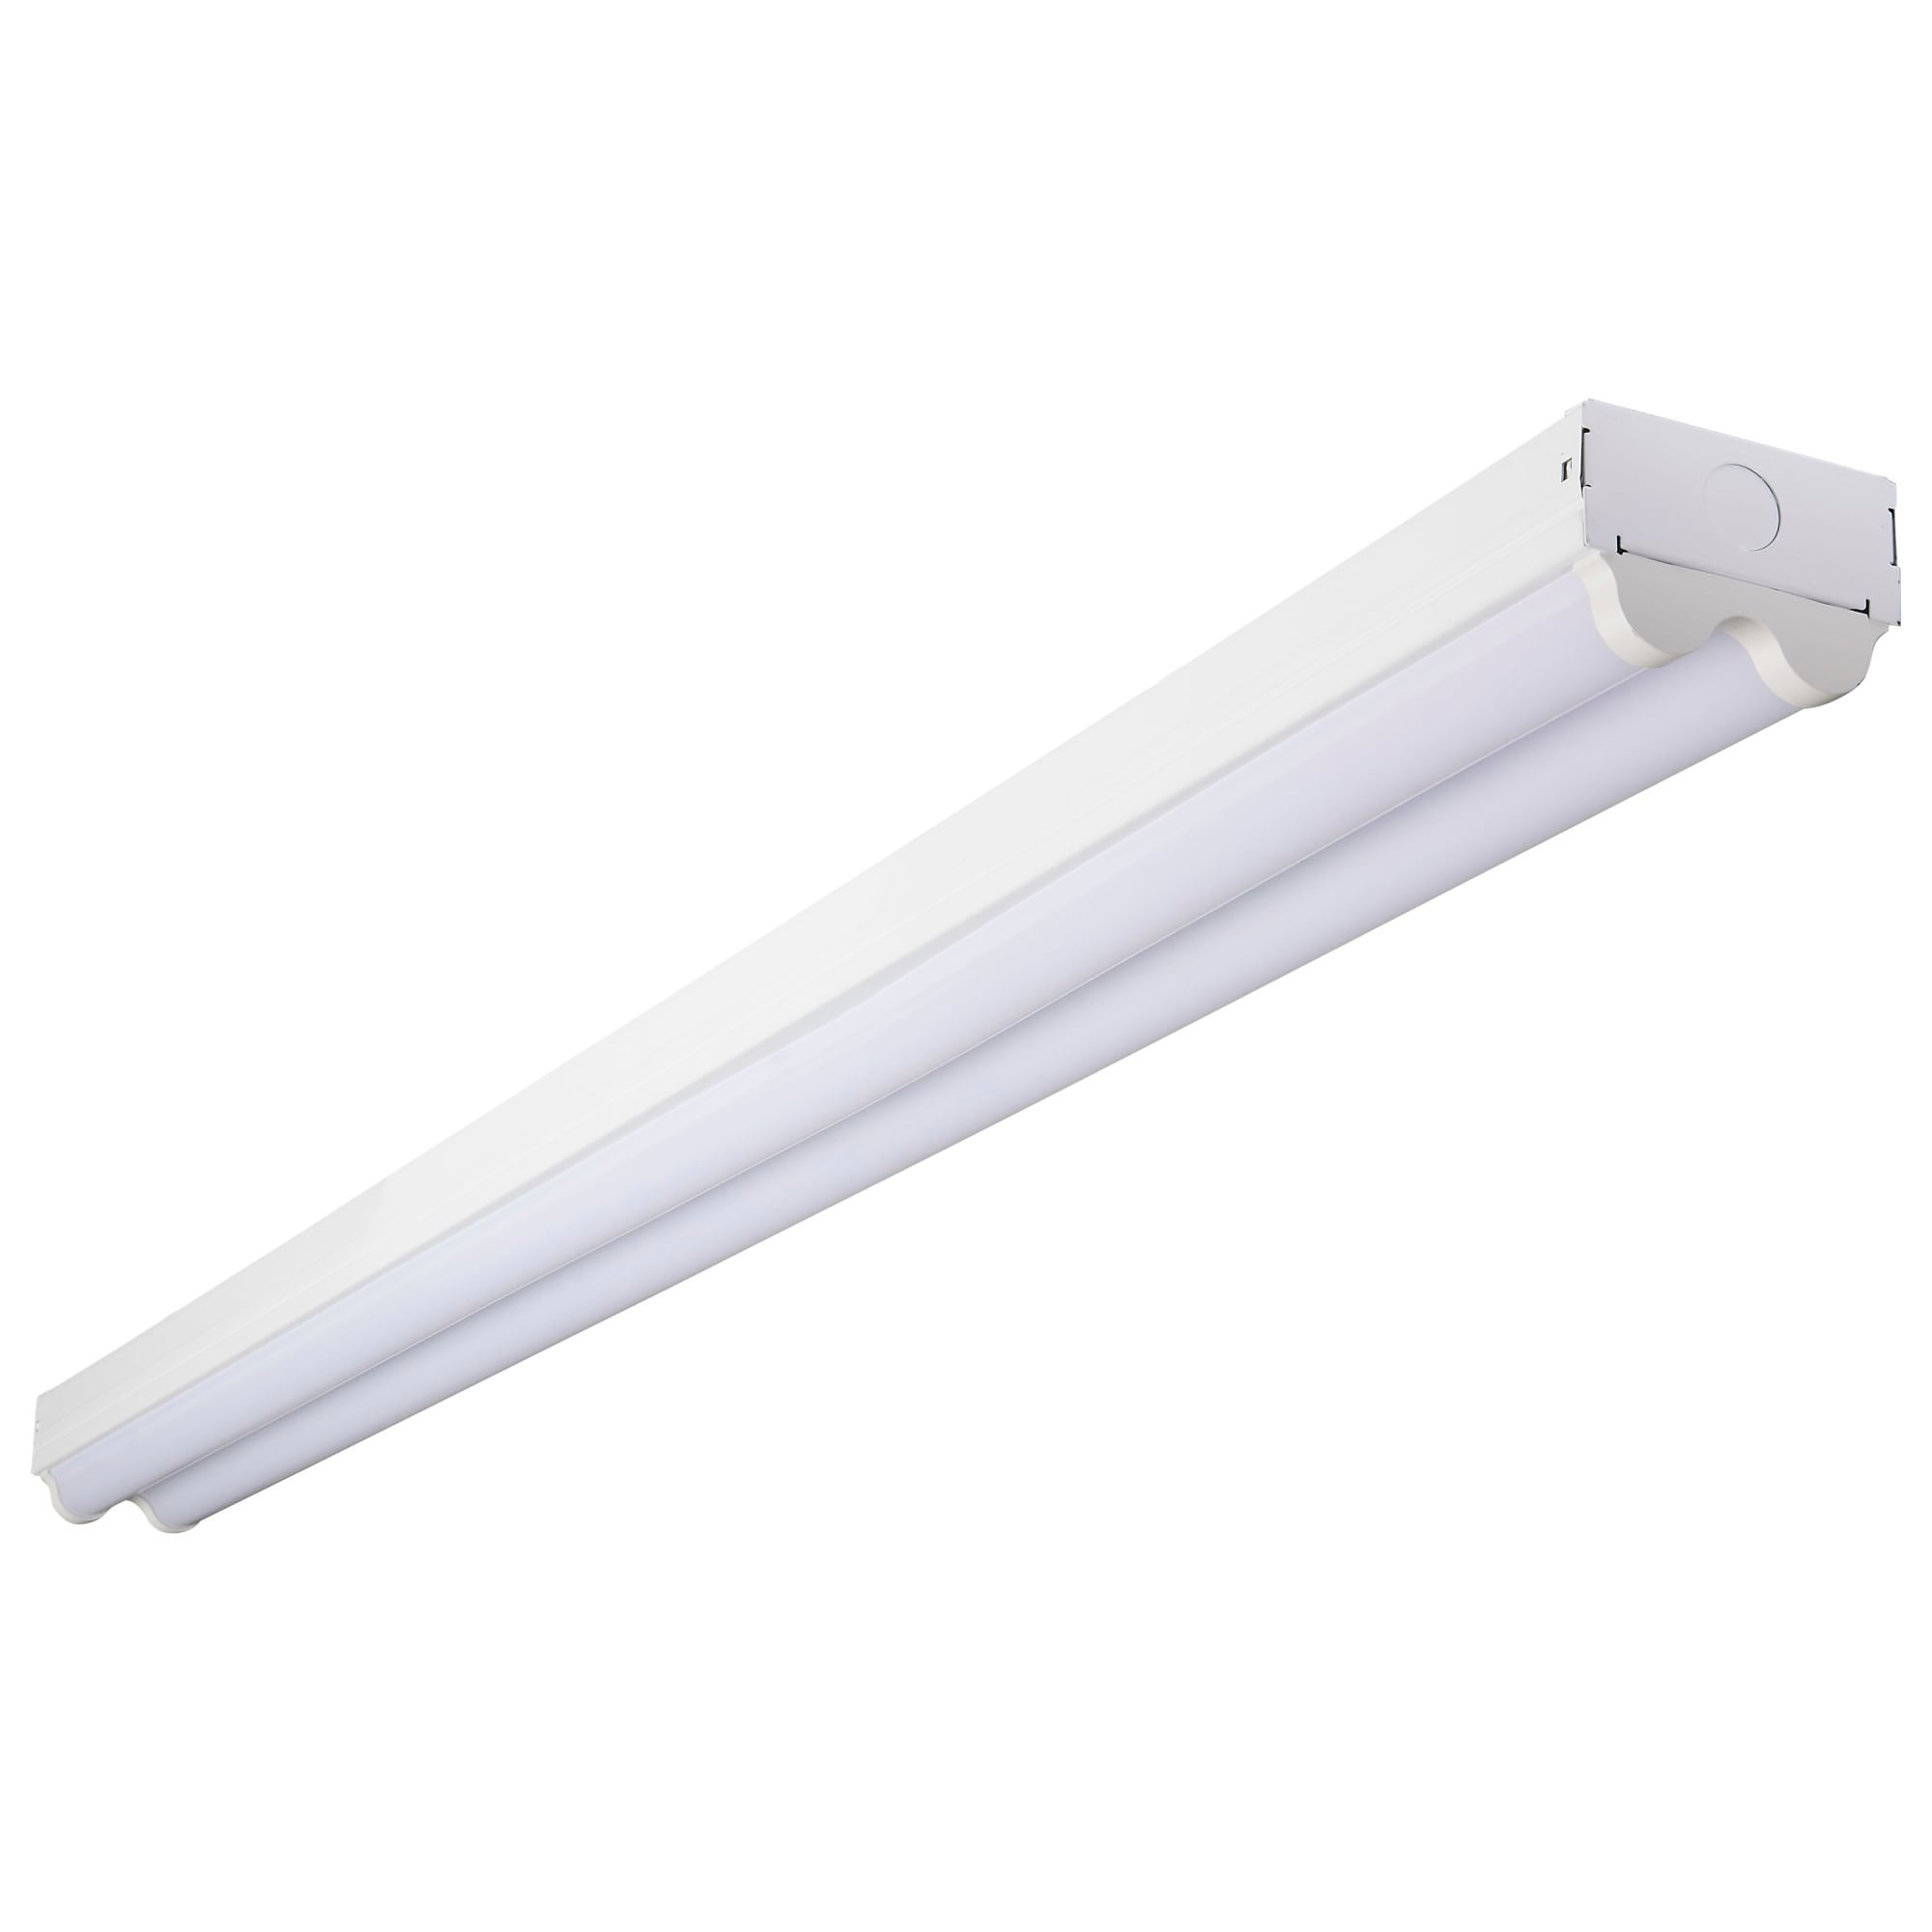 Nuvo Lighting 65/1071 48" Long LED Commercial Strip Light Bed Bath   Beyond 38214600